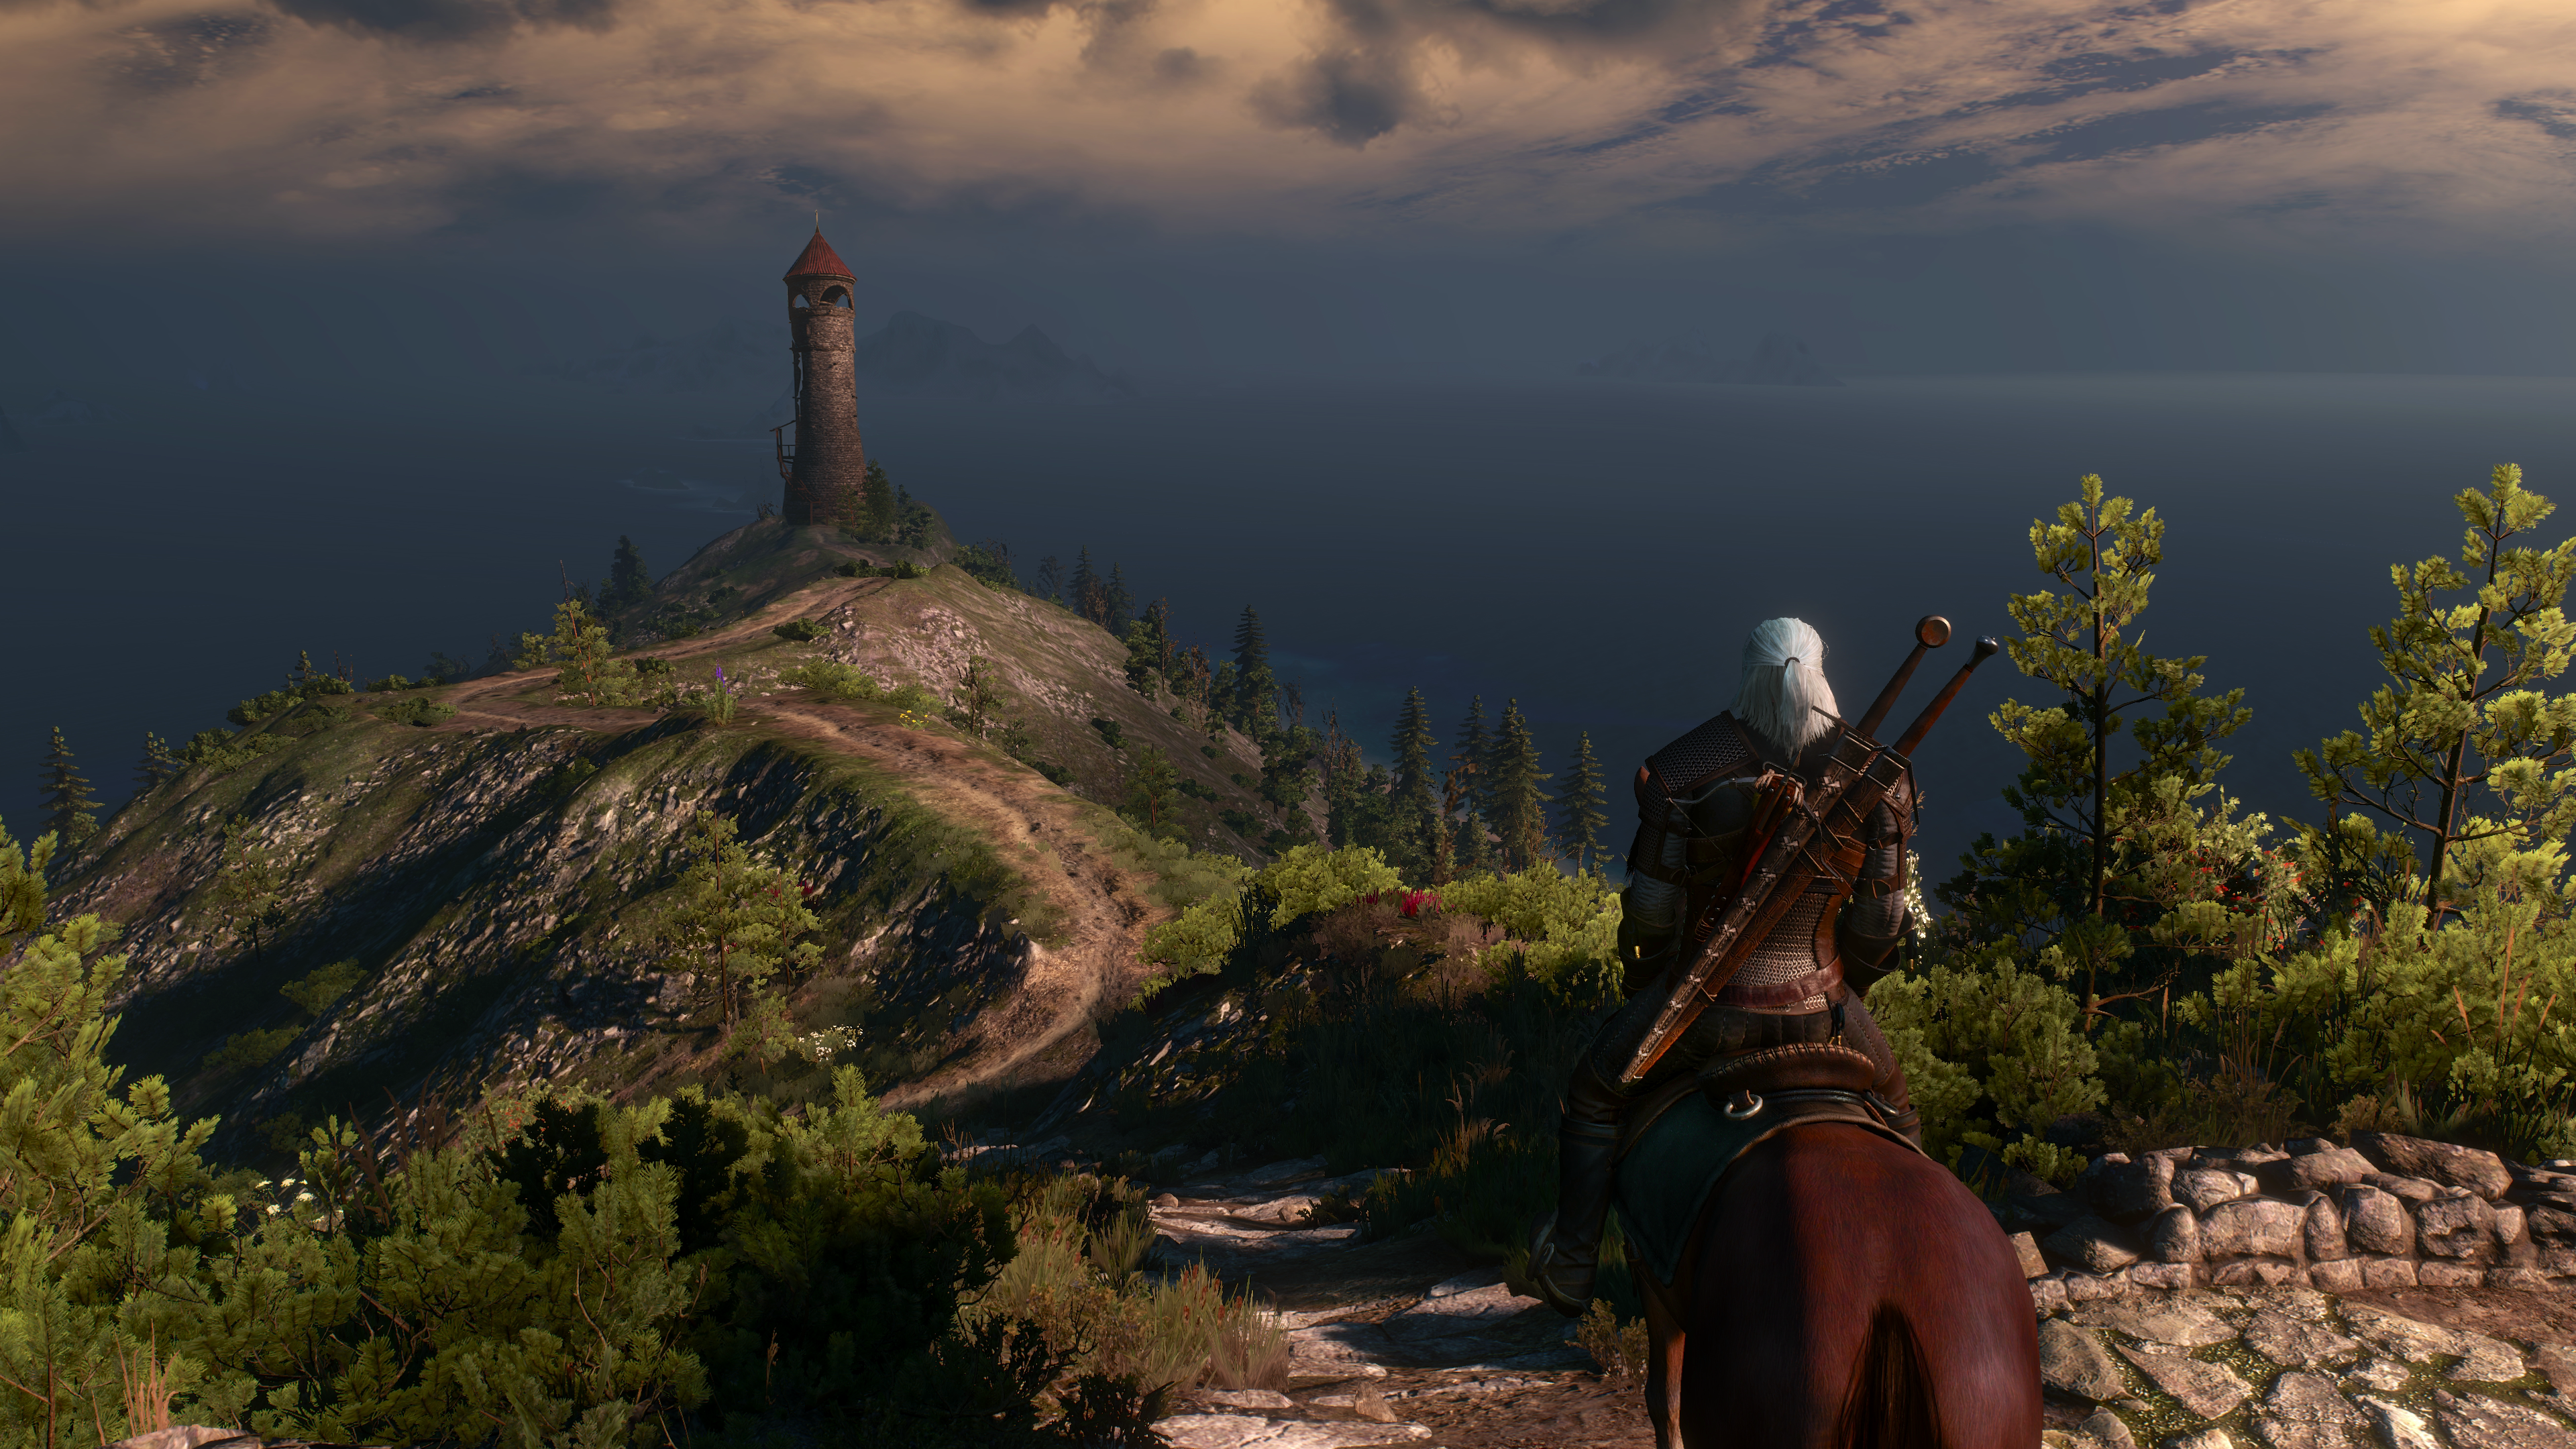 Free download The Witcher 3 4k wallpaper [3840x2160] for your Desktop, Mobile & Tablet. Explore Witcher 3 4K Wallpaper. The Witcher 3 Wallpaper 1080p, Witcher Wild Hunt Wallpaper, Witcher 3 Wallpaper 1360x768